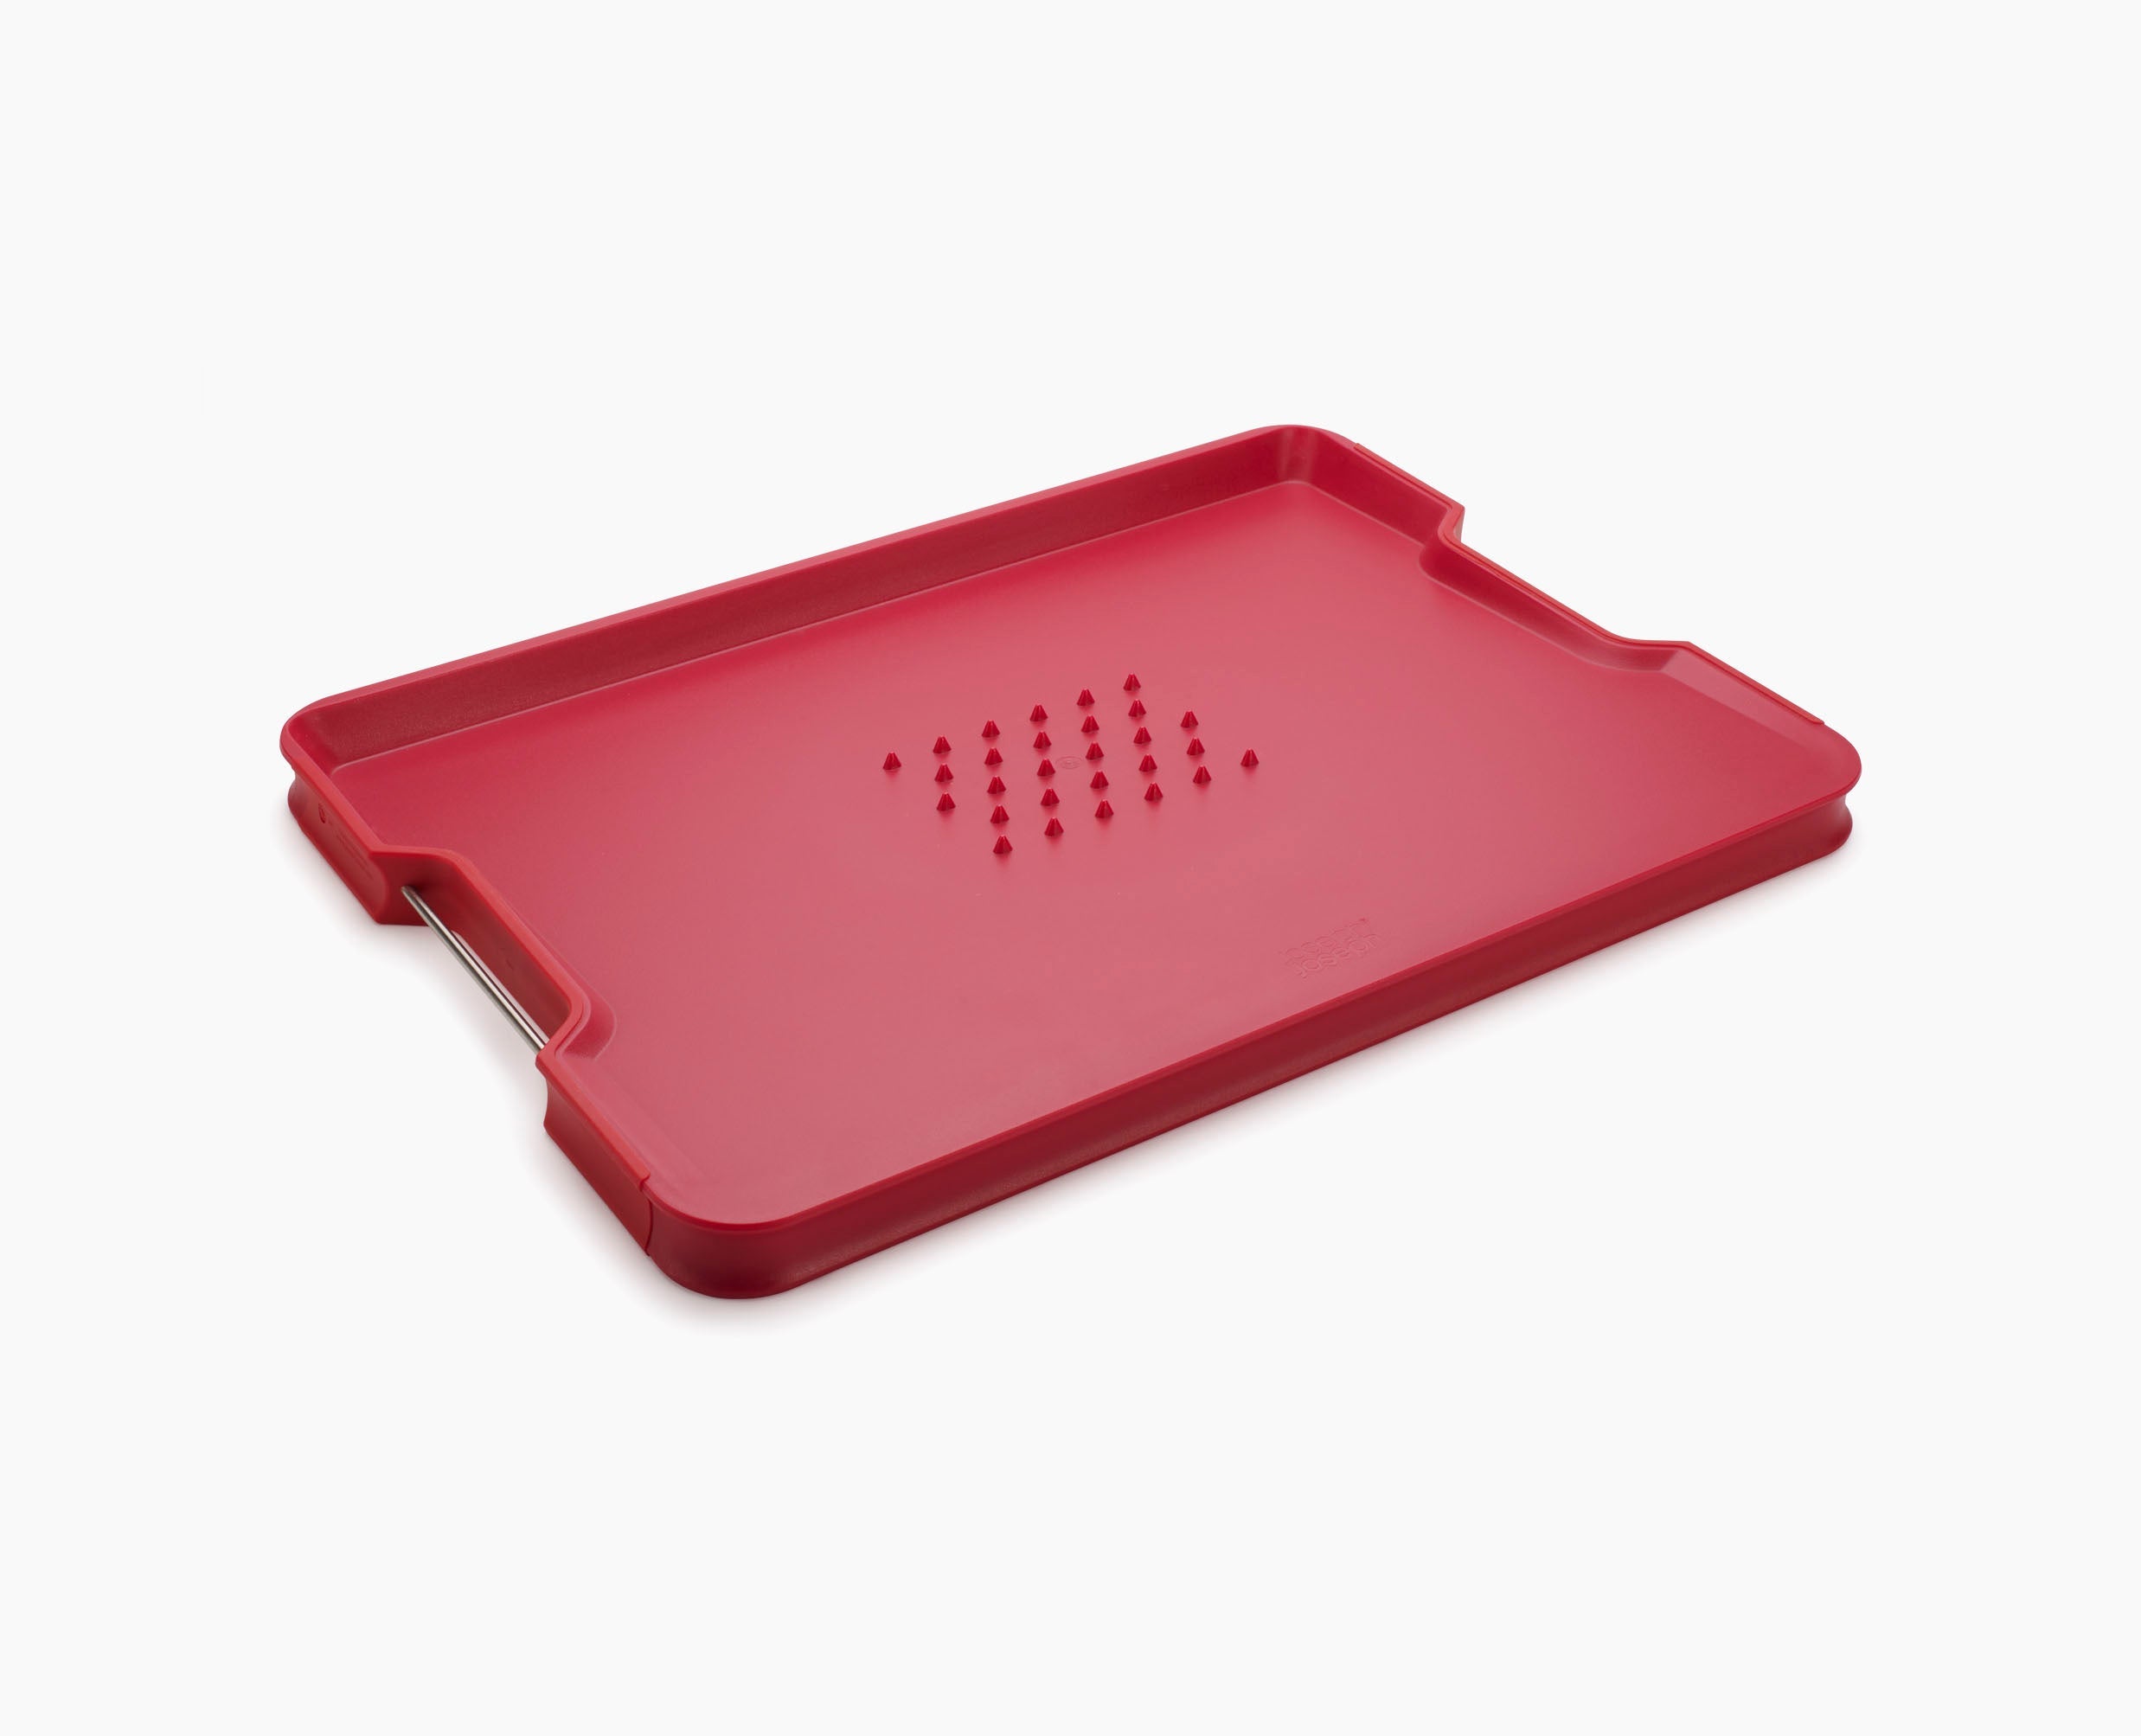 Joseph Joseph Rinse and Chop Cutting Board - The Owner-Builder Network